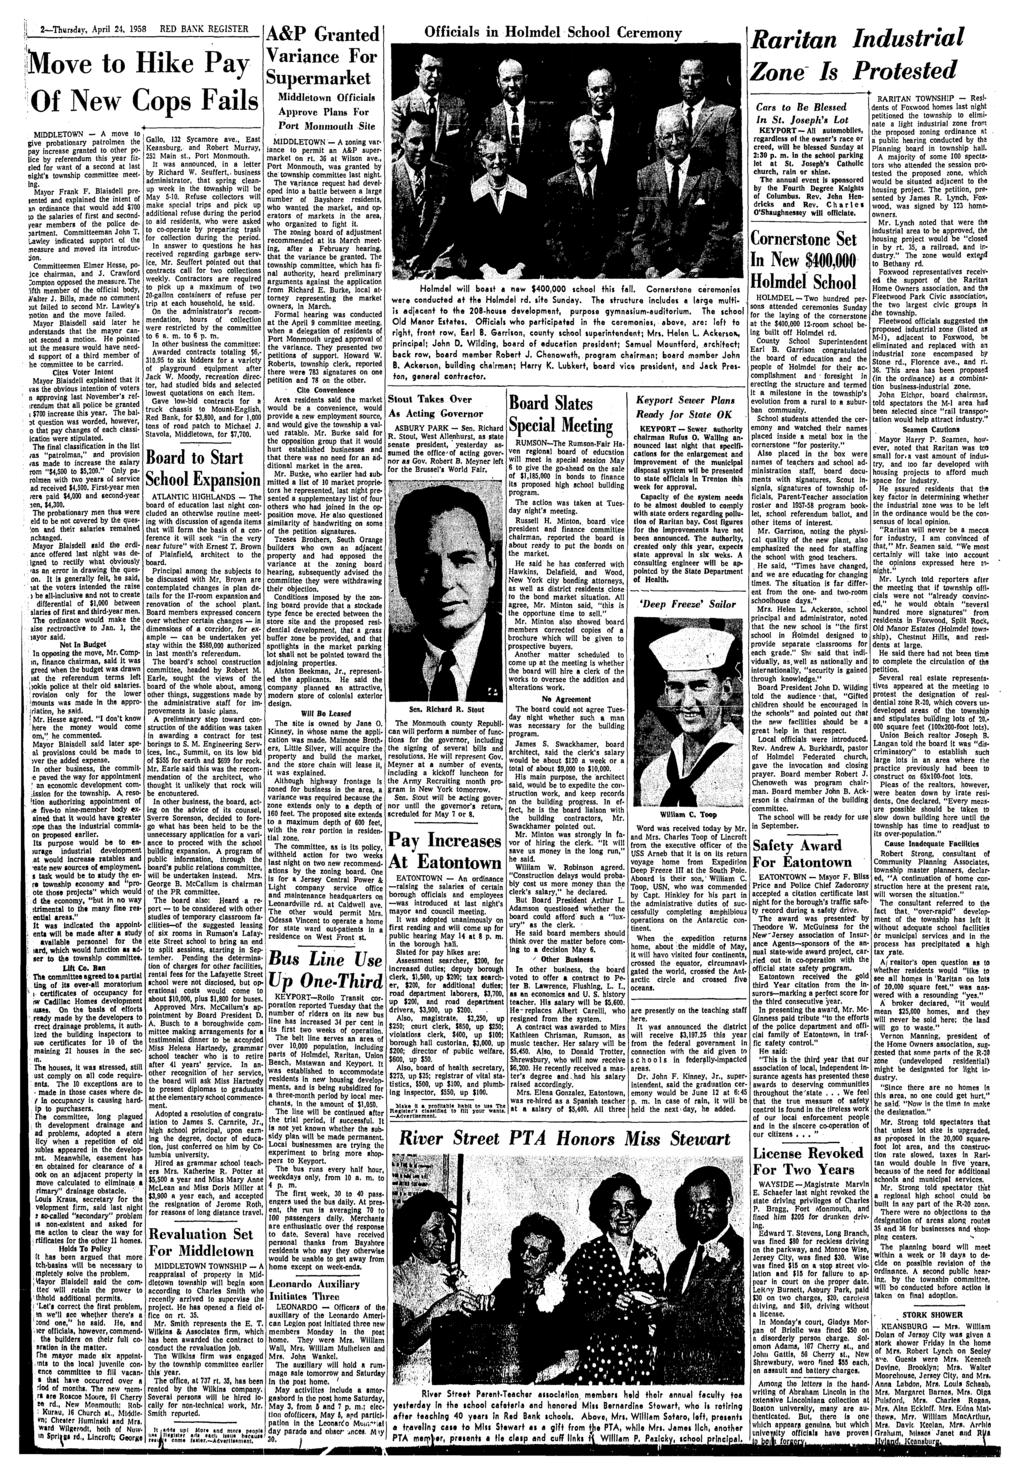 2 Thursday, April 24, 1958 REGISTER Move to Hike Pay Of New Cops Fails MIDDLETOWN A move to give probationary patrolmen the pay increase granted to other police by referendum this year fizrled for